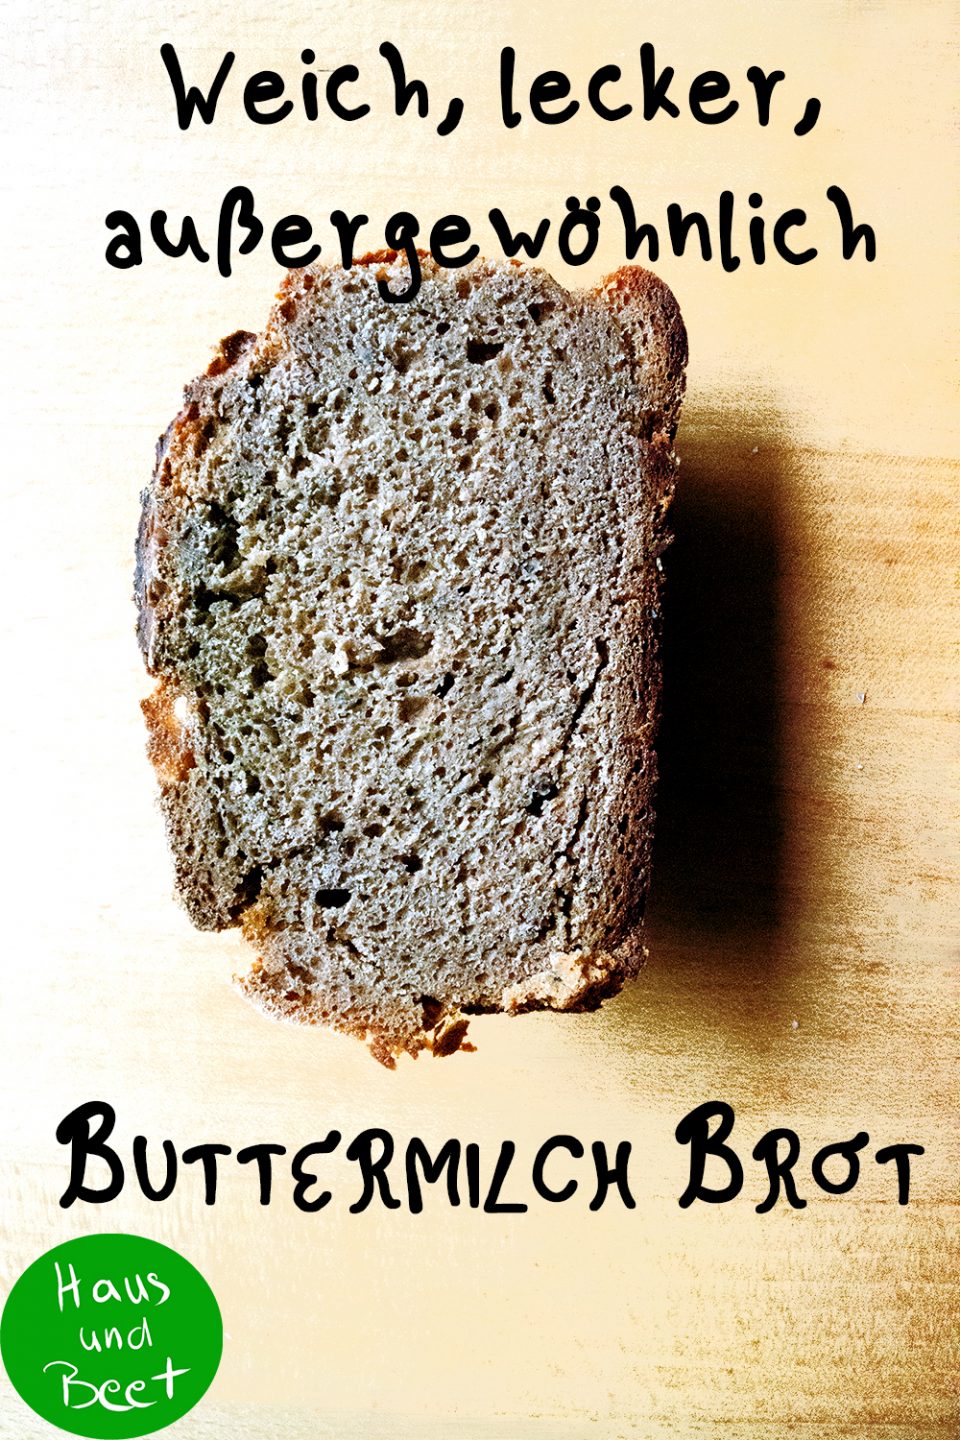 Buttermilch Brot